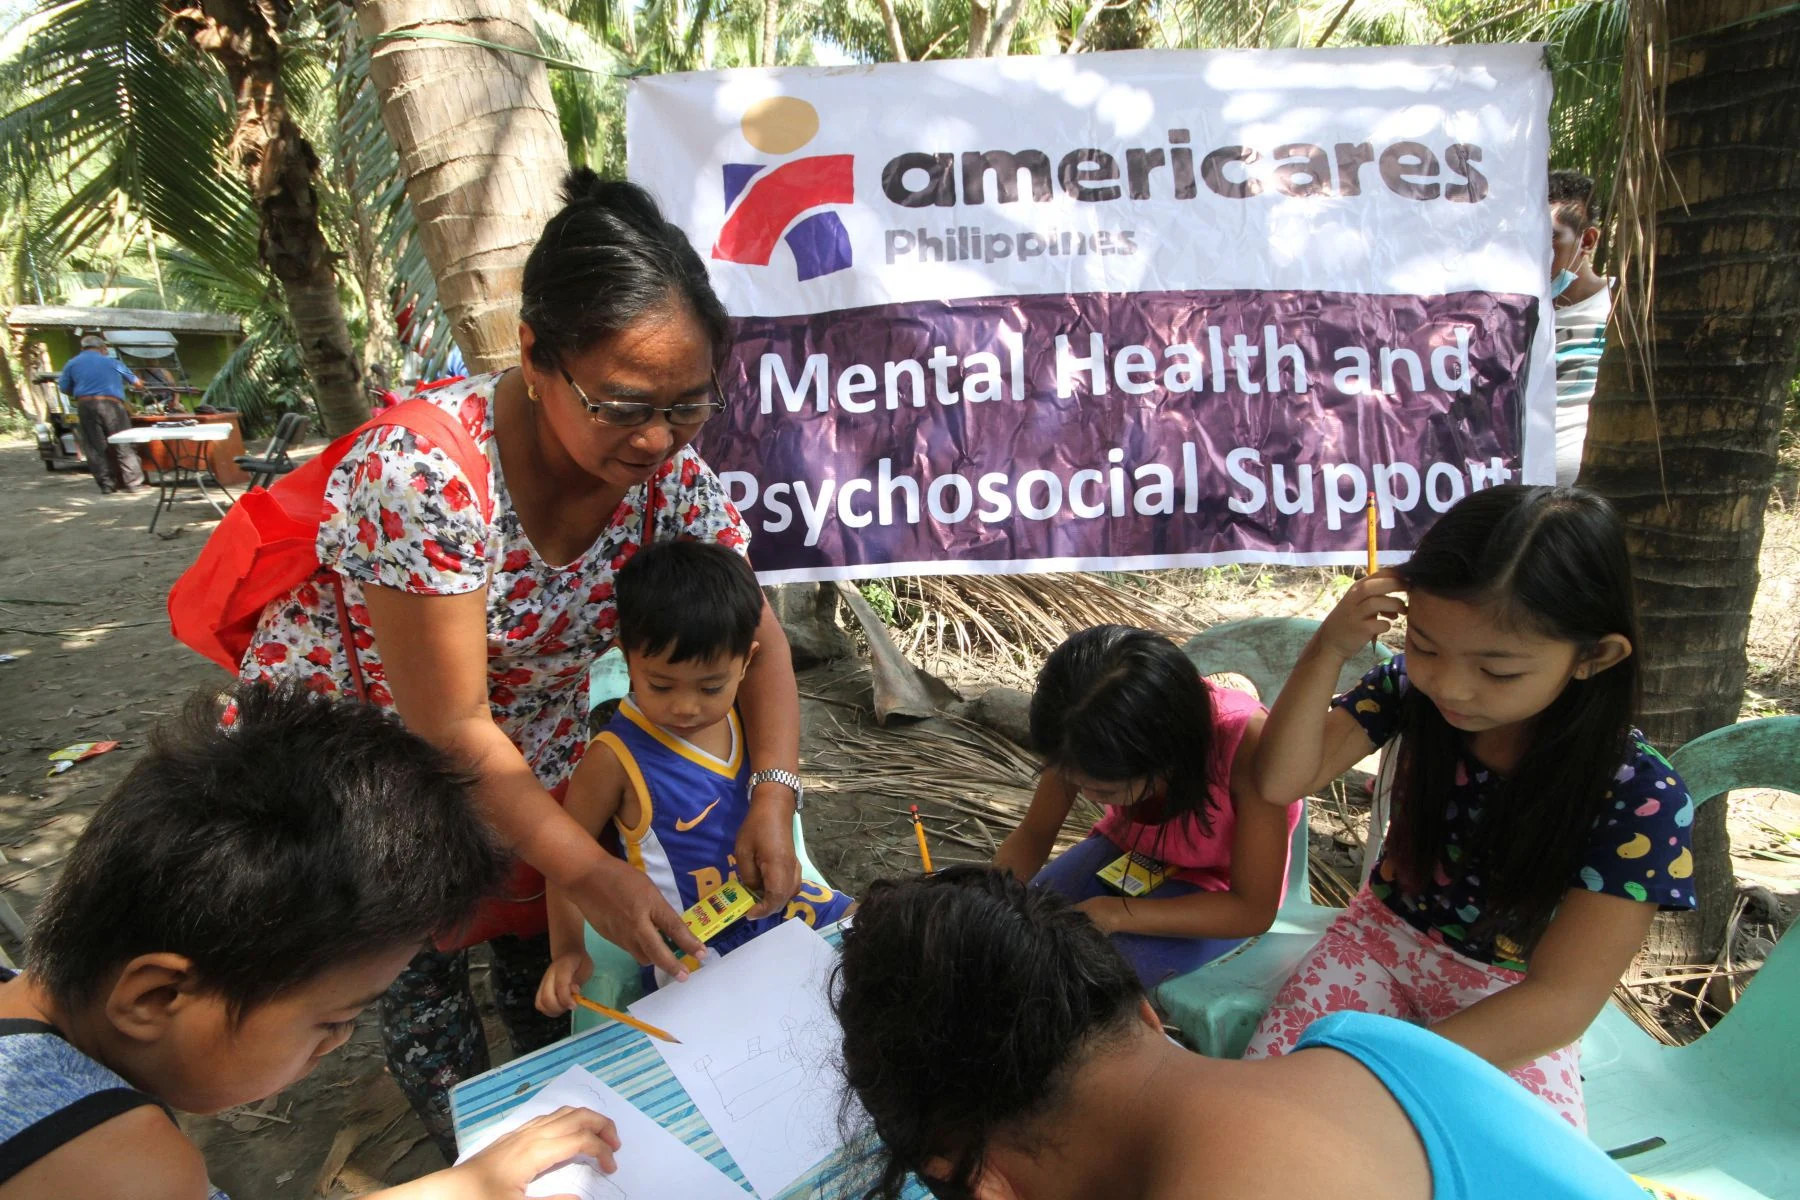 Health worker behind child in a circle of 5 children working with paper and pencils, drawing pictures in front of a sign that reads, "Americares Philippines, Mental Health and Psychosocial Support.